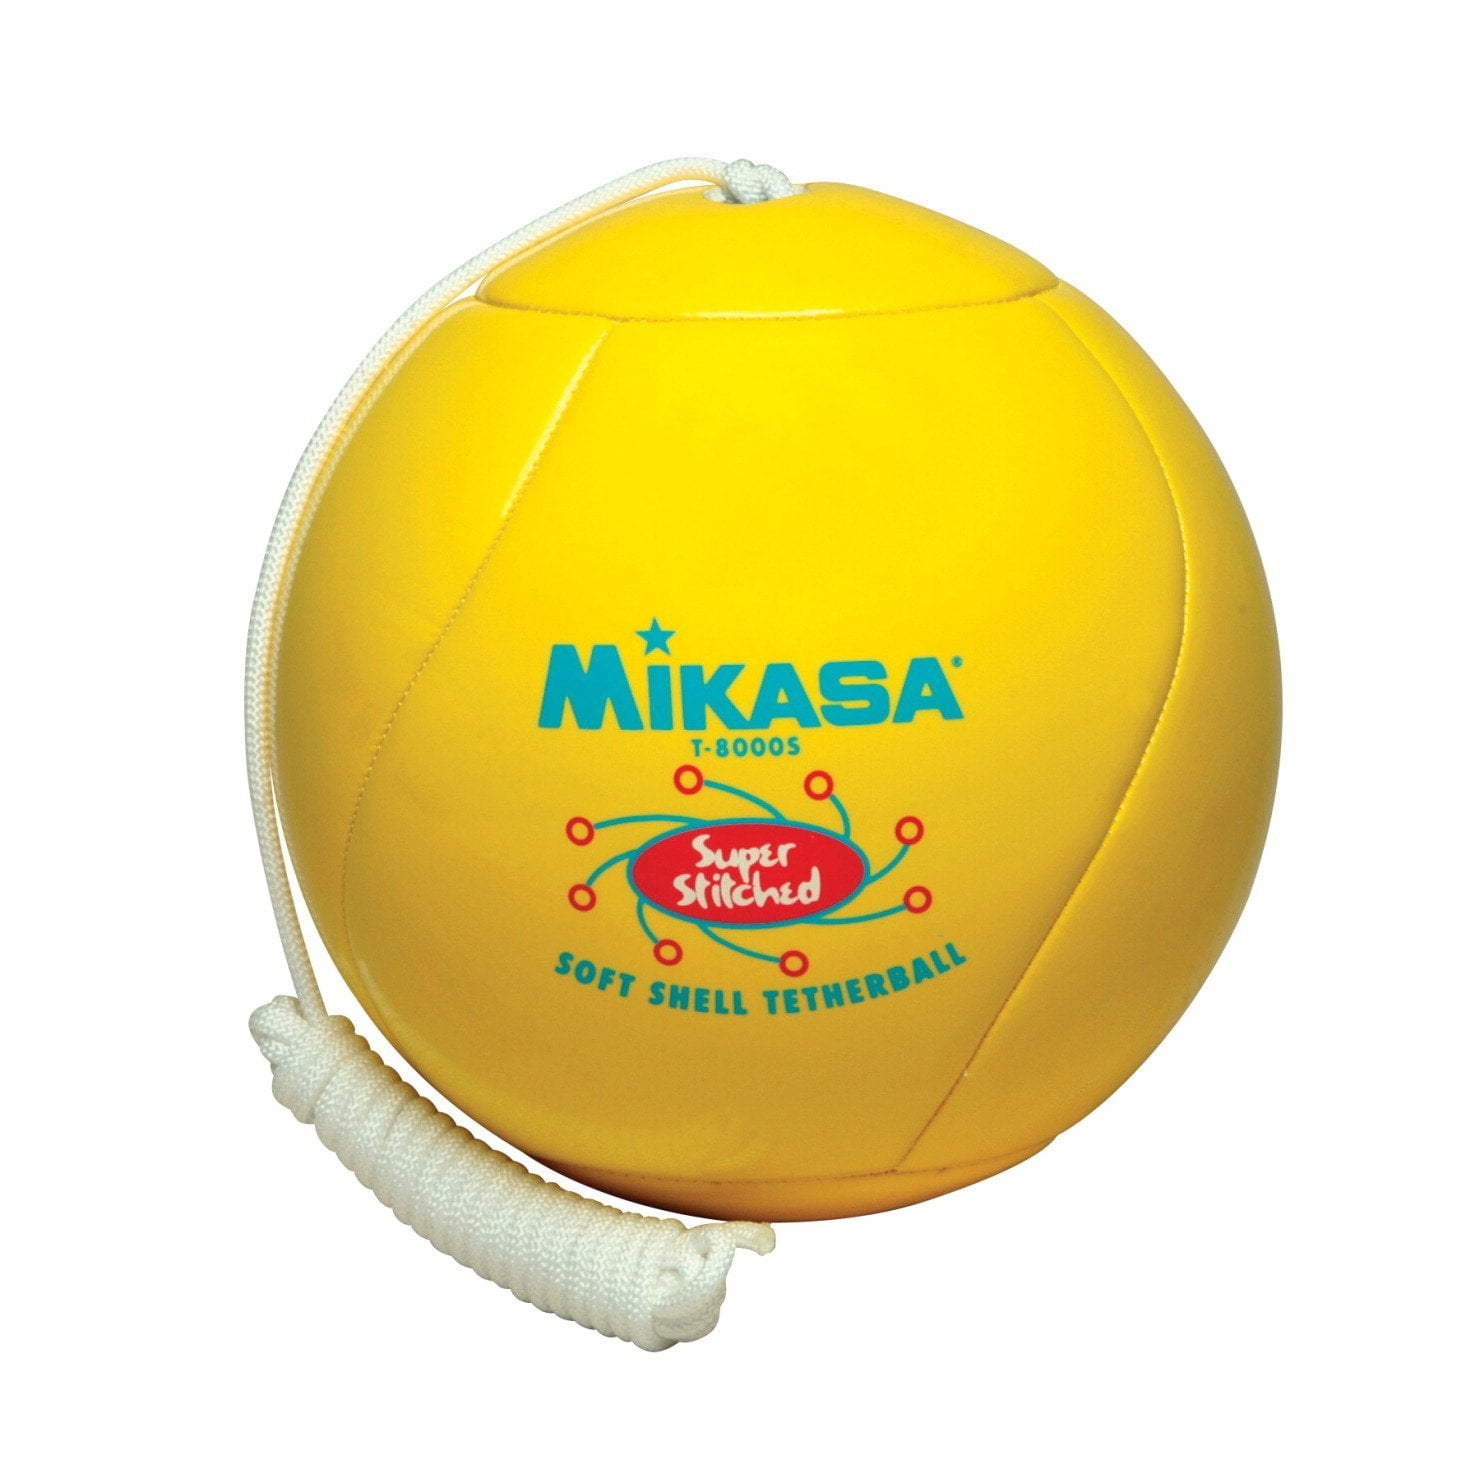 T8000S Super Soft Touch Institutional Tetherball, Yellow, Features cushioned soft shell cover and durable nylon rope By Mikasa Sports